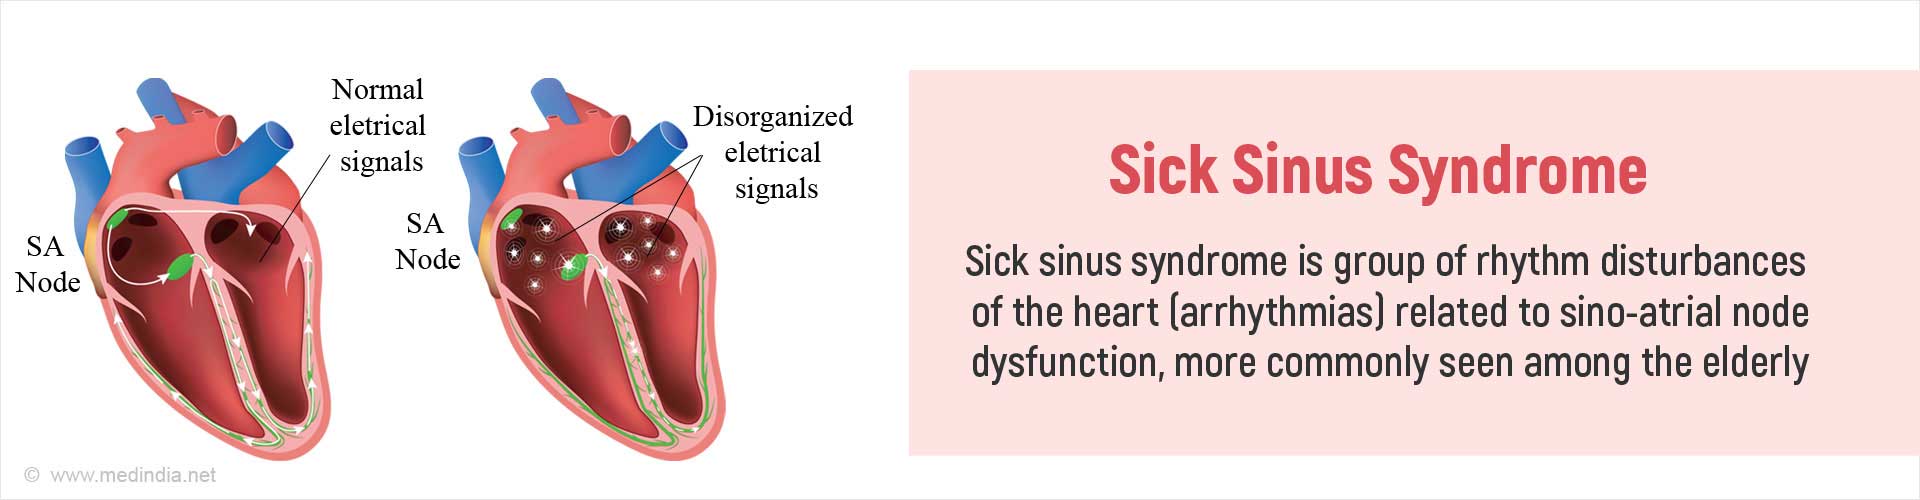 sick sinus syndrome treatment guidelines